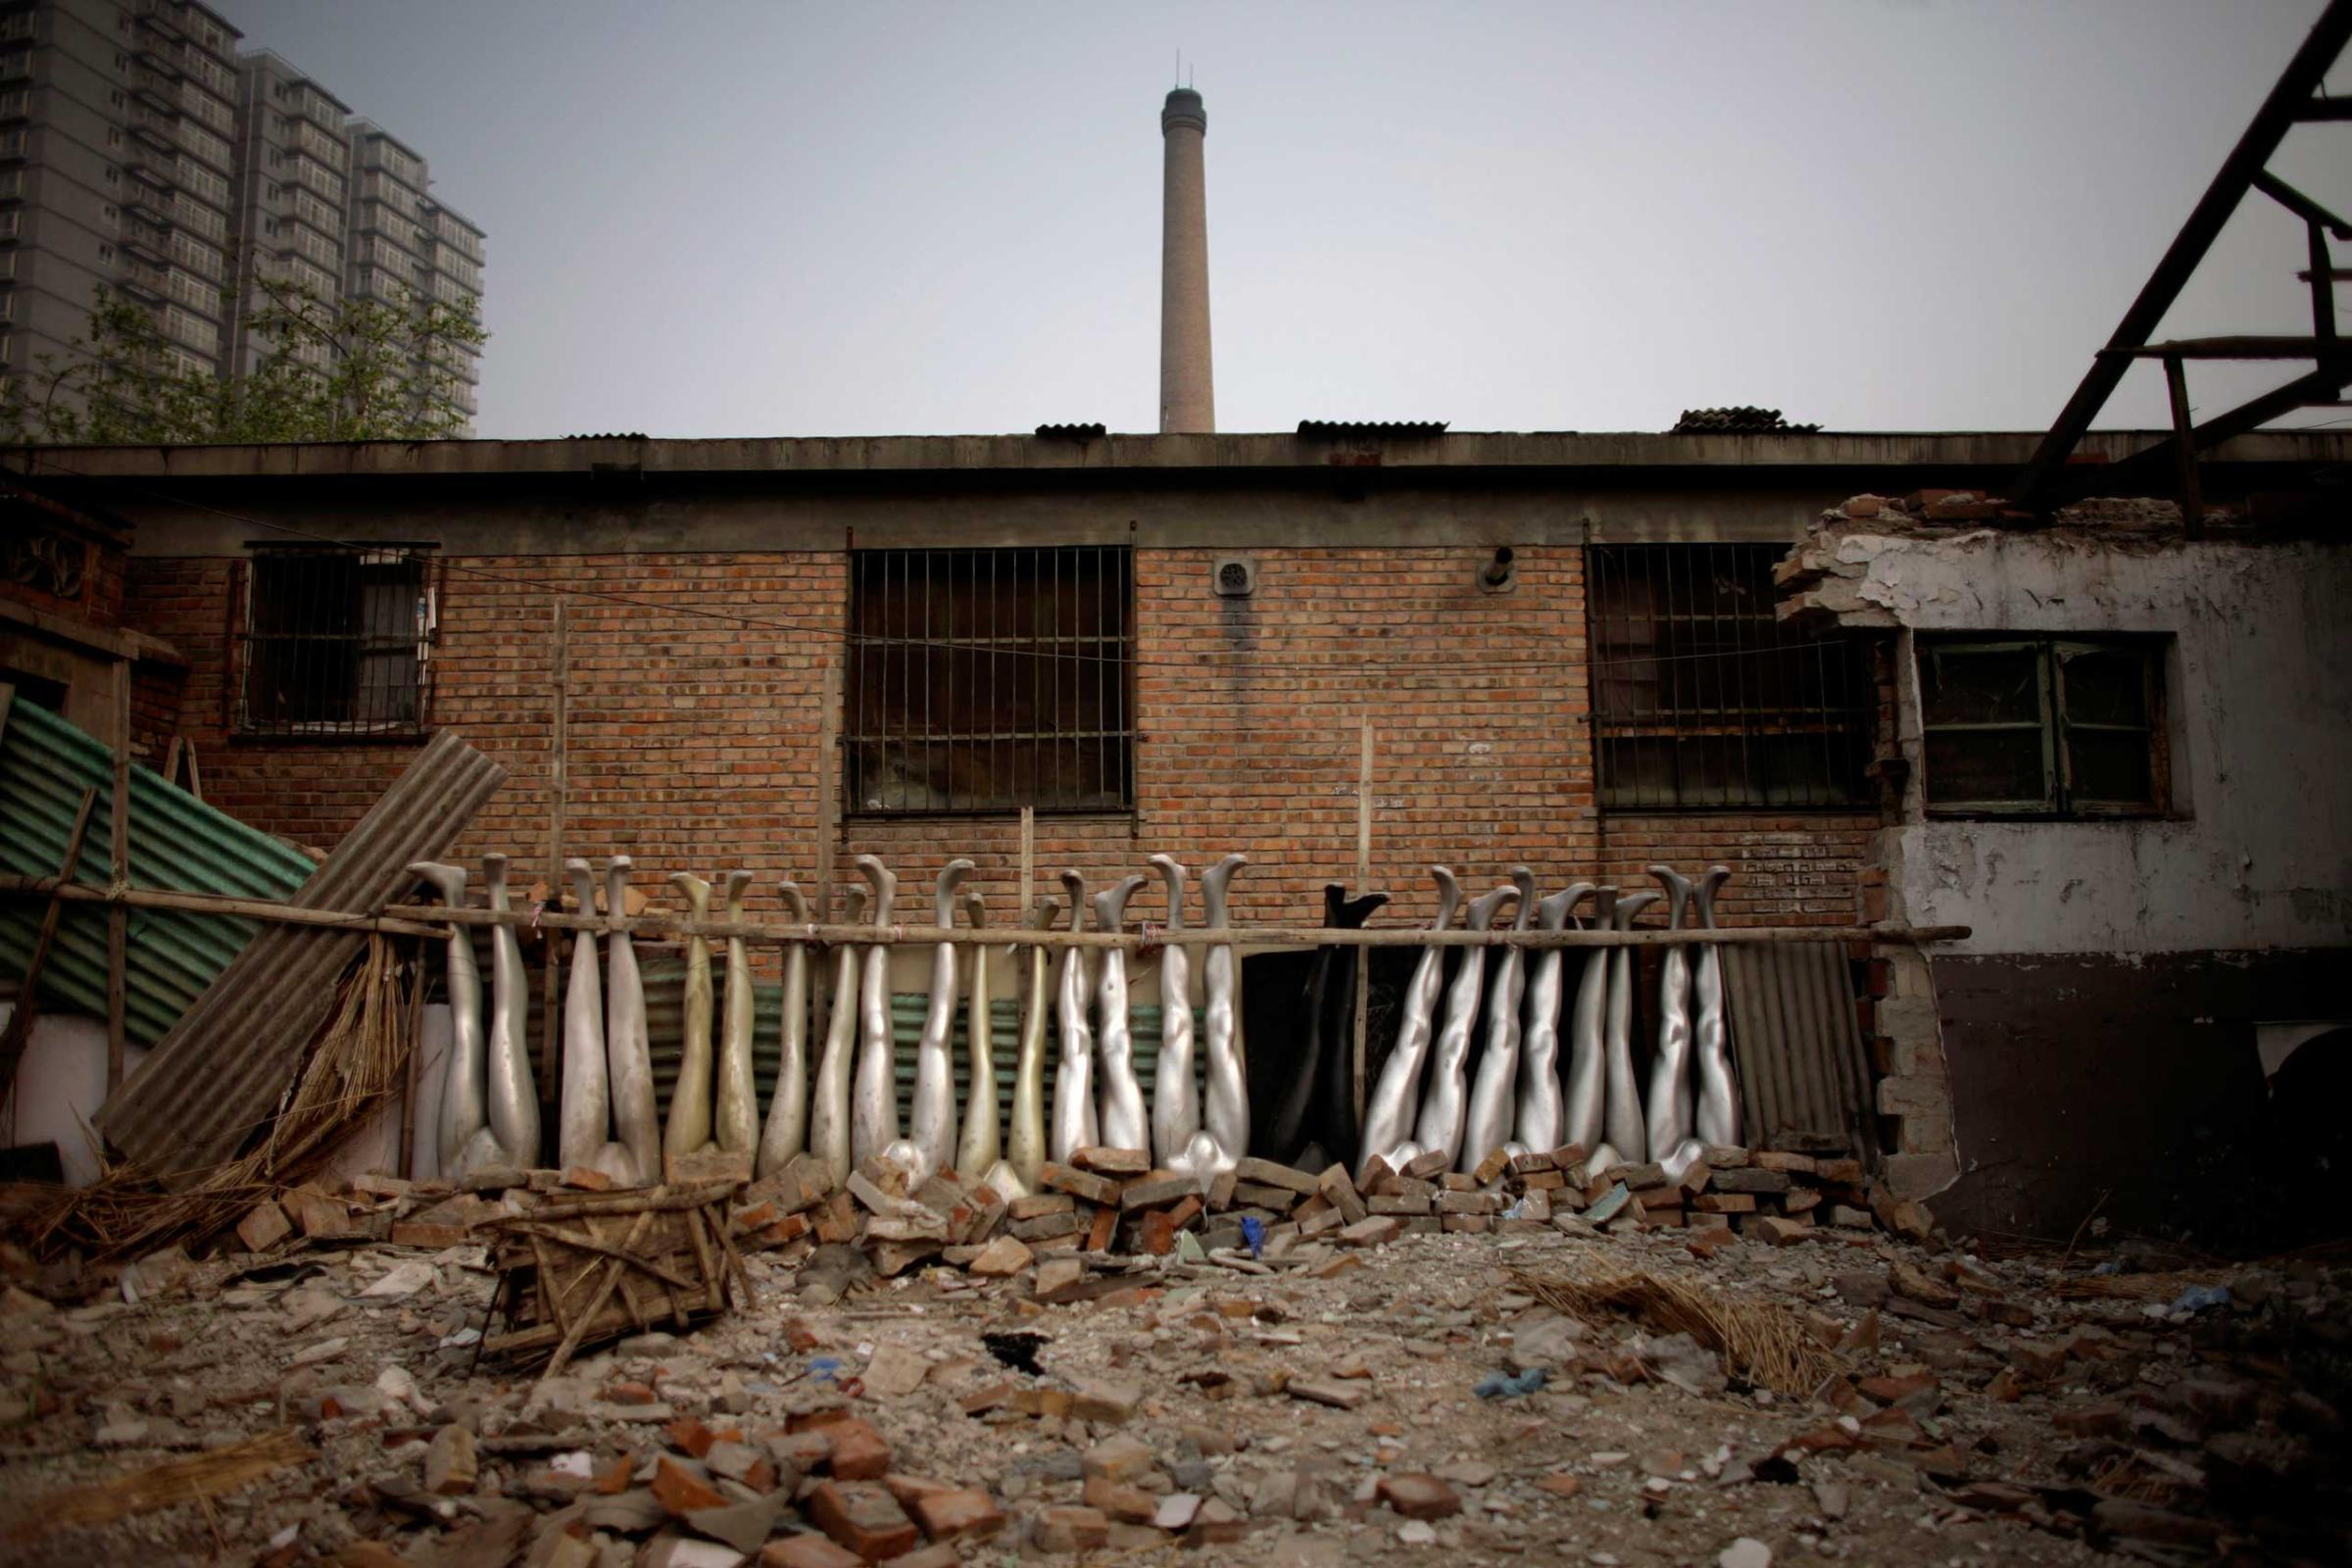 Mannequins legs lie amongst the rubble of a demolished house next to a construction site in Beijing Tuesday, April 15, 2008. China's inflation eased slightly to 8.3 percent in March, while economic growth in the first quarter of the year slowed to a still-robust 10.6 percent, the government reported Wednesday. Consumer prices rose 8.3 percent in March compared with the same month last year, down slightly from February's 8.7 percent rate, the highest in nearly 12 years, according to the National Bureau of Statistics.